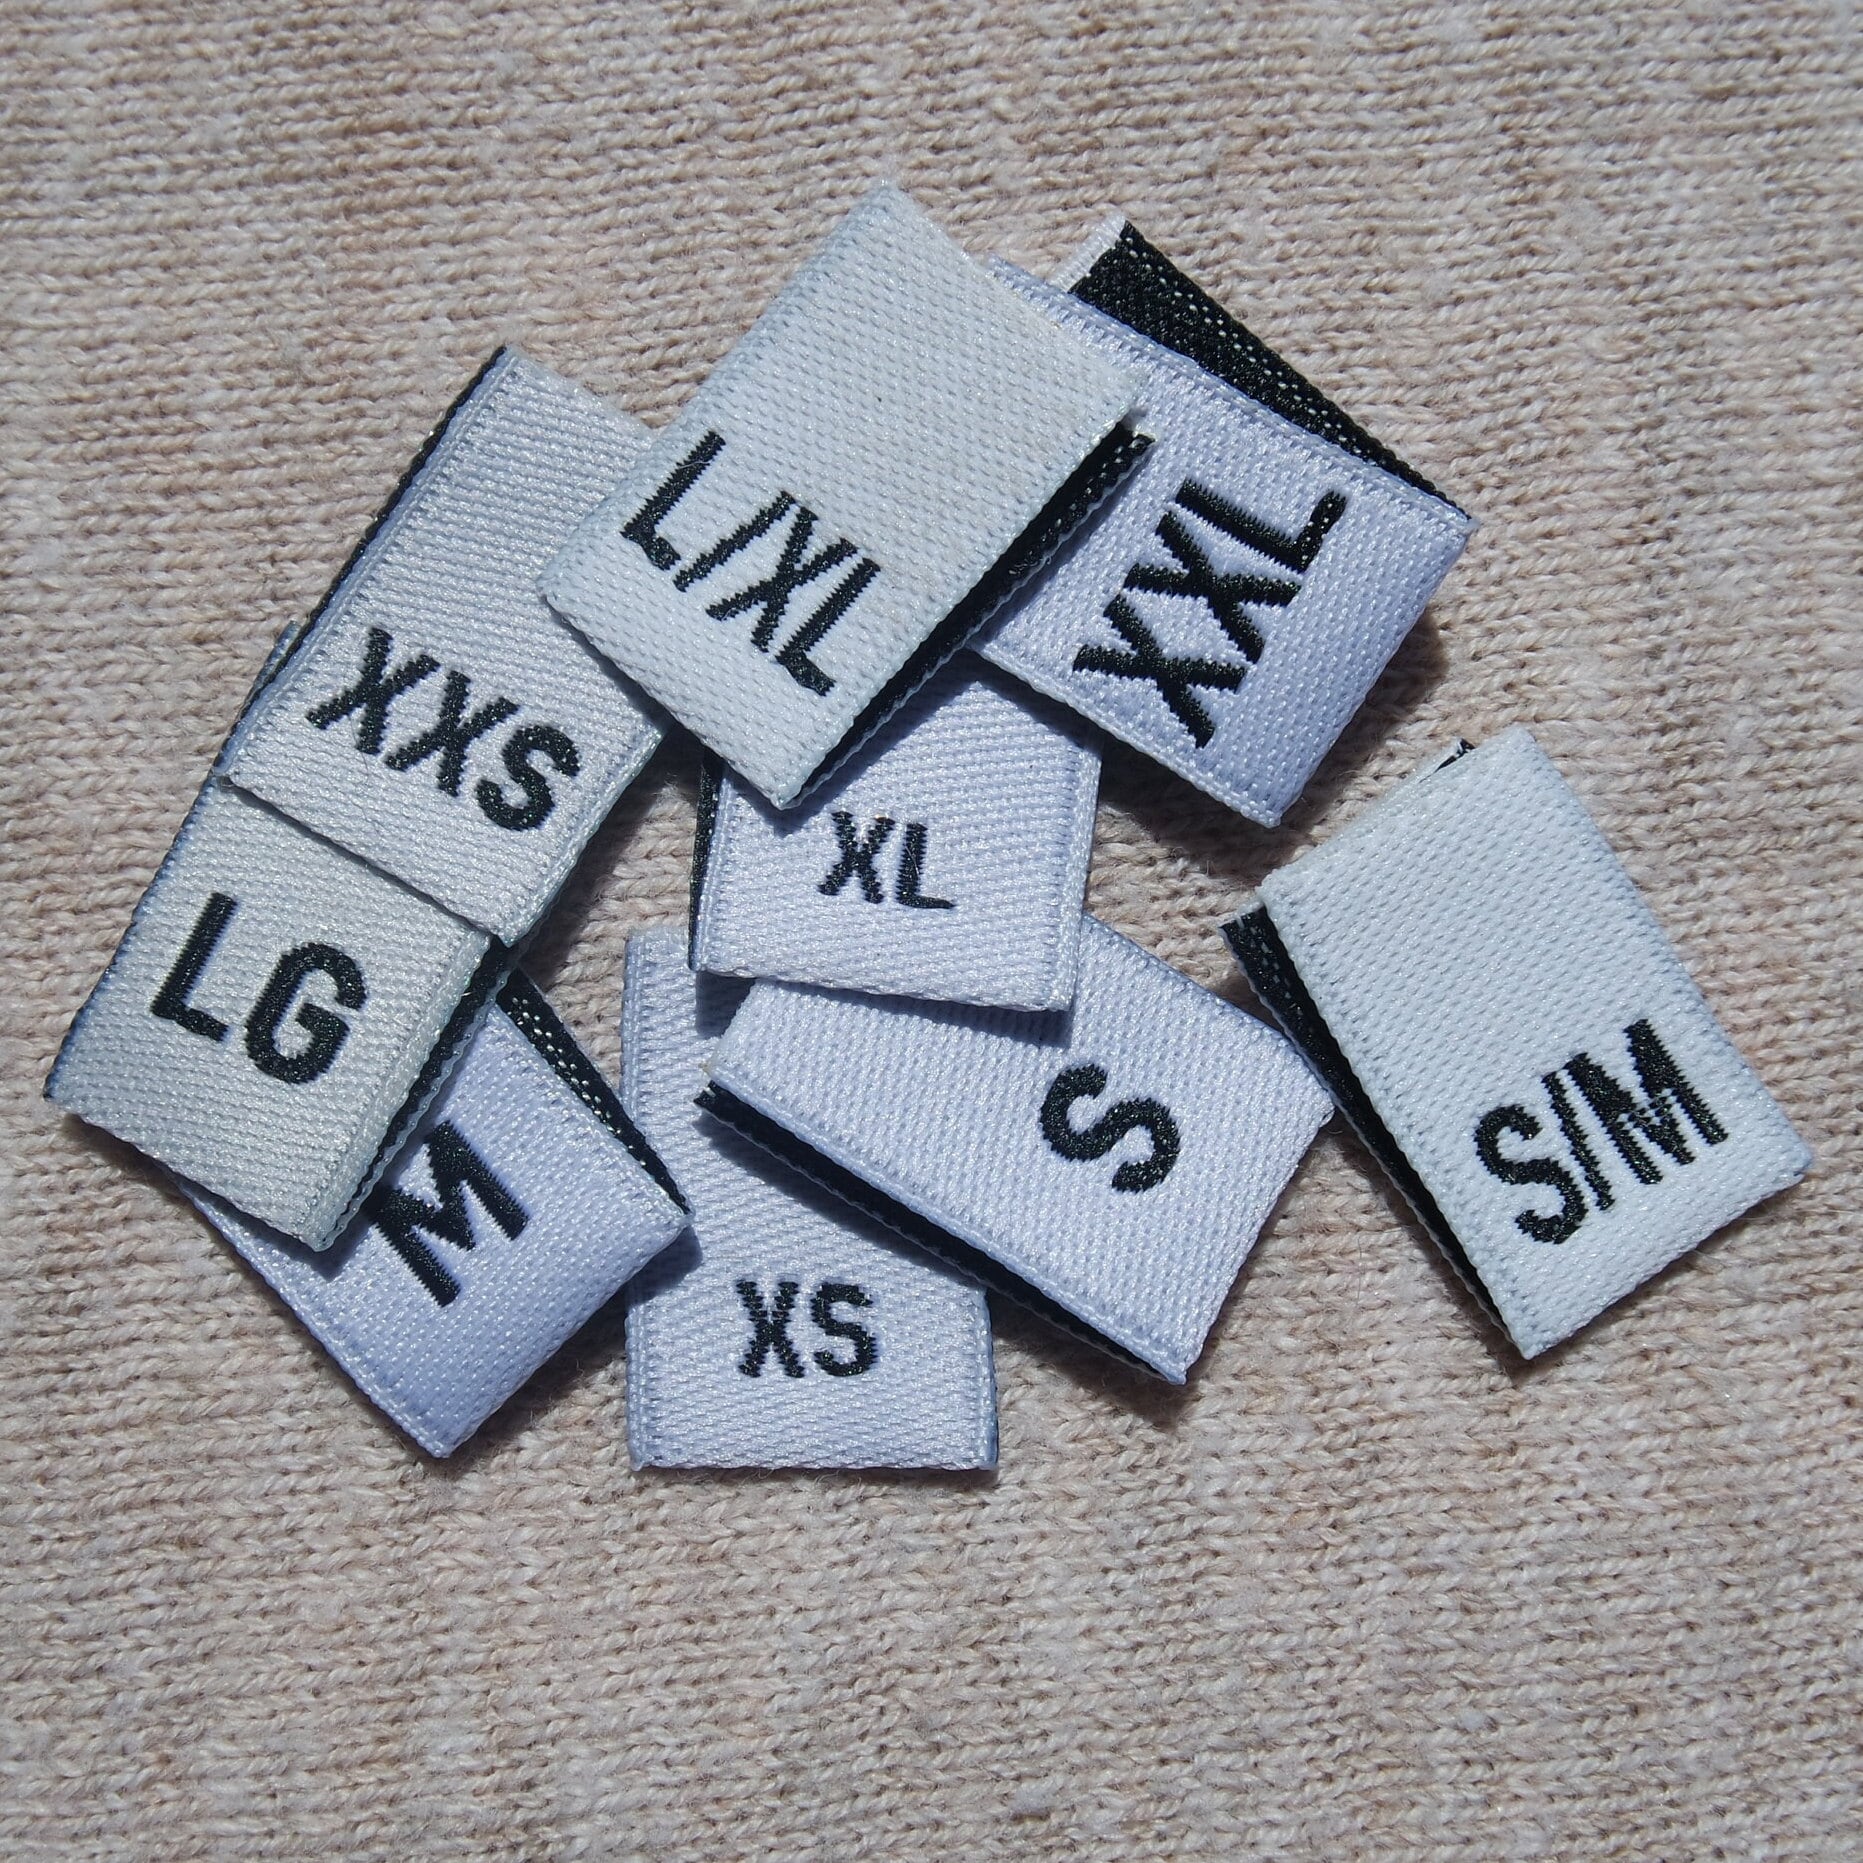 KIDS CLOTHING SIZES Stamps, Numbers Rubber Stamps Set, Children Clothes  Tags, Babies Labels, Clothing Labeling Stamps, Sizing Icons Stamps 